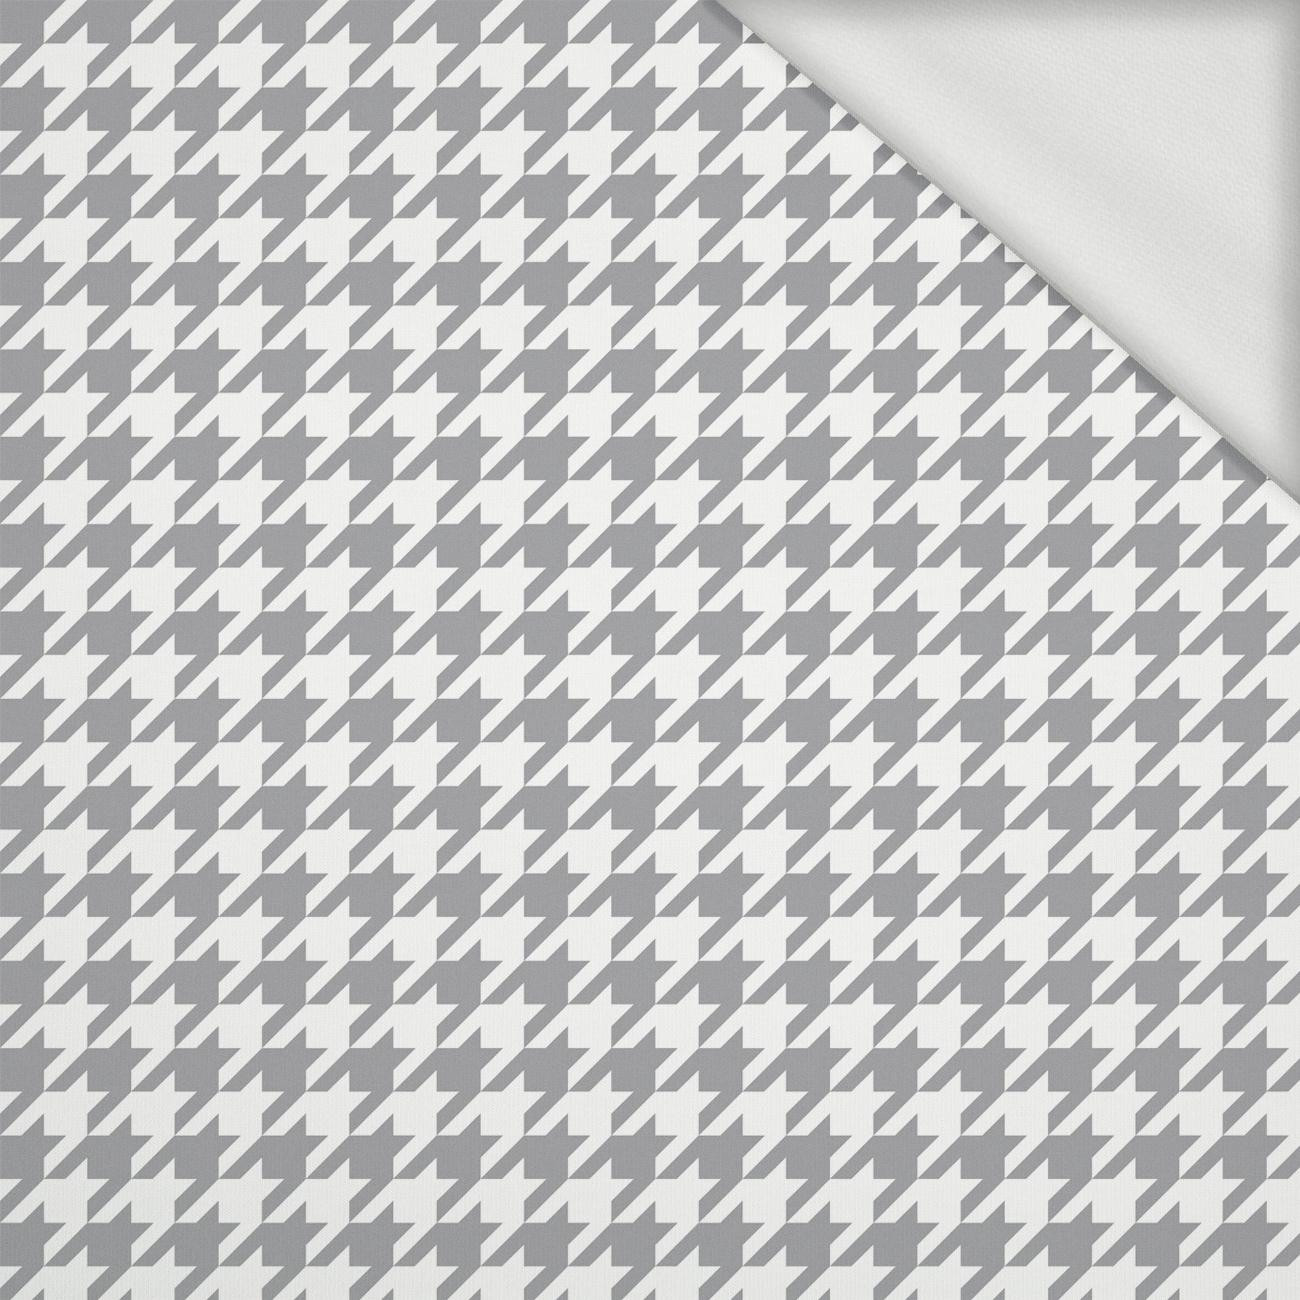 GREY HOUNDSTOOTH / WHITE - looped knit fabric